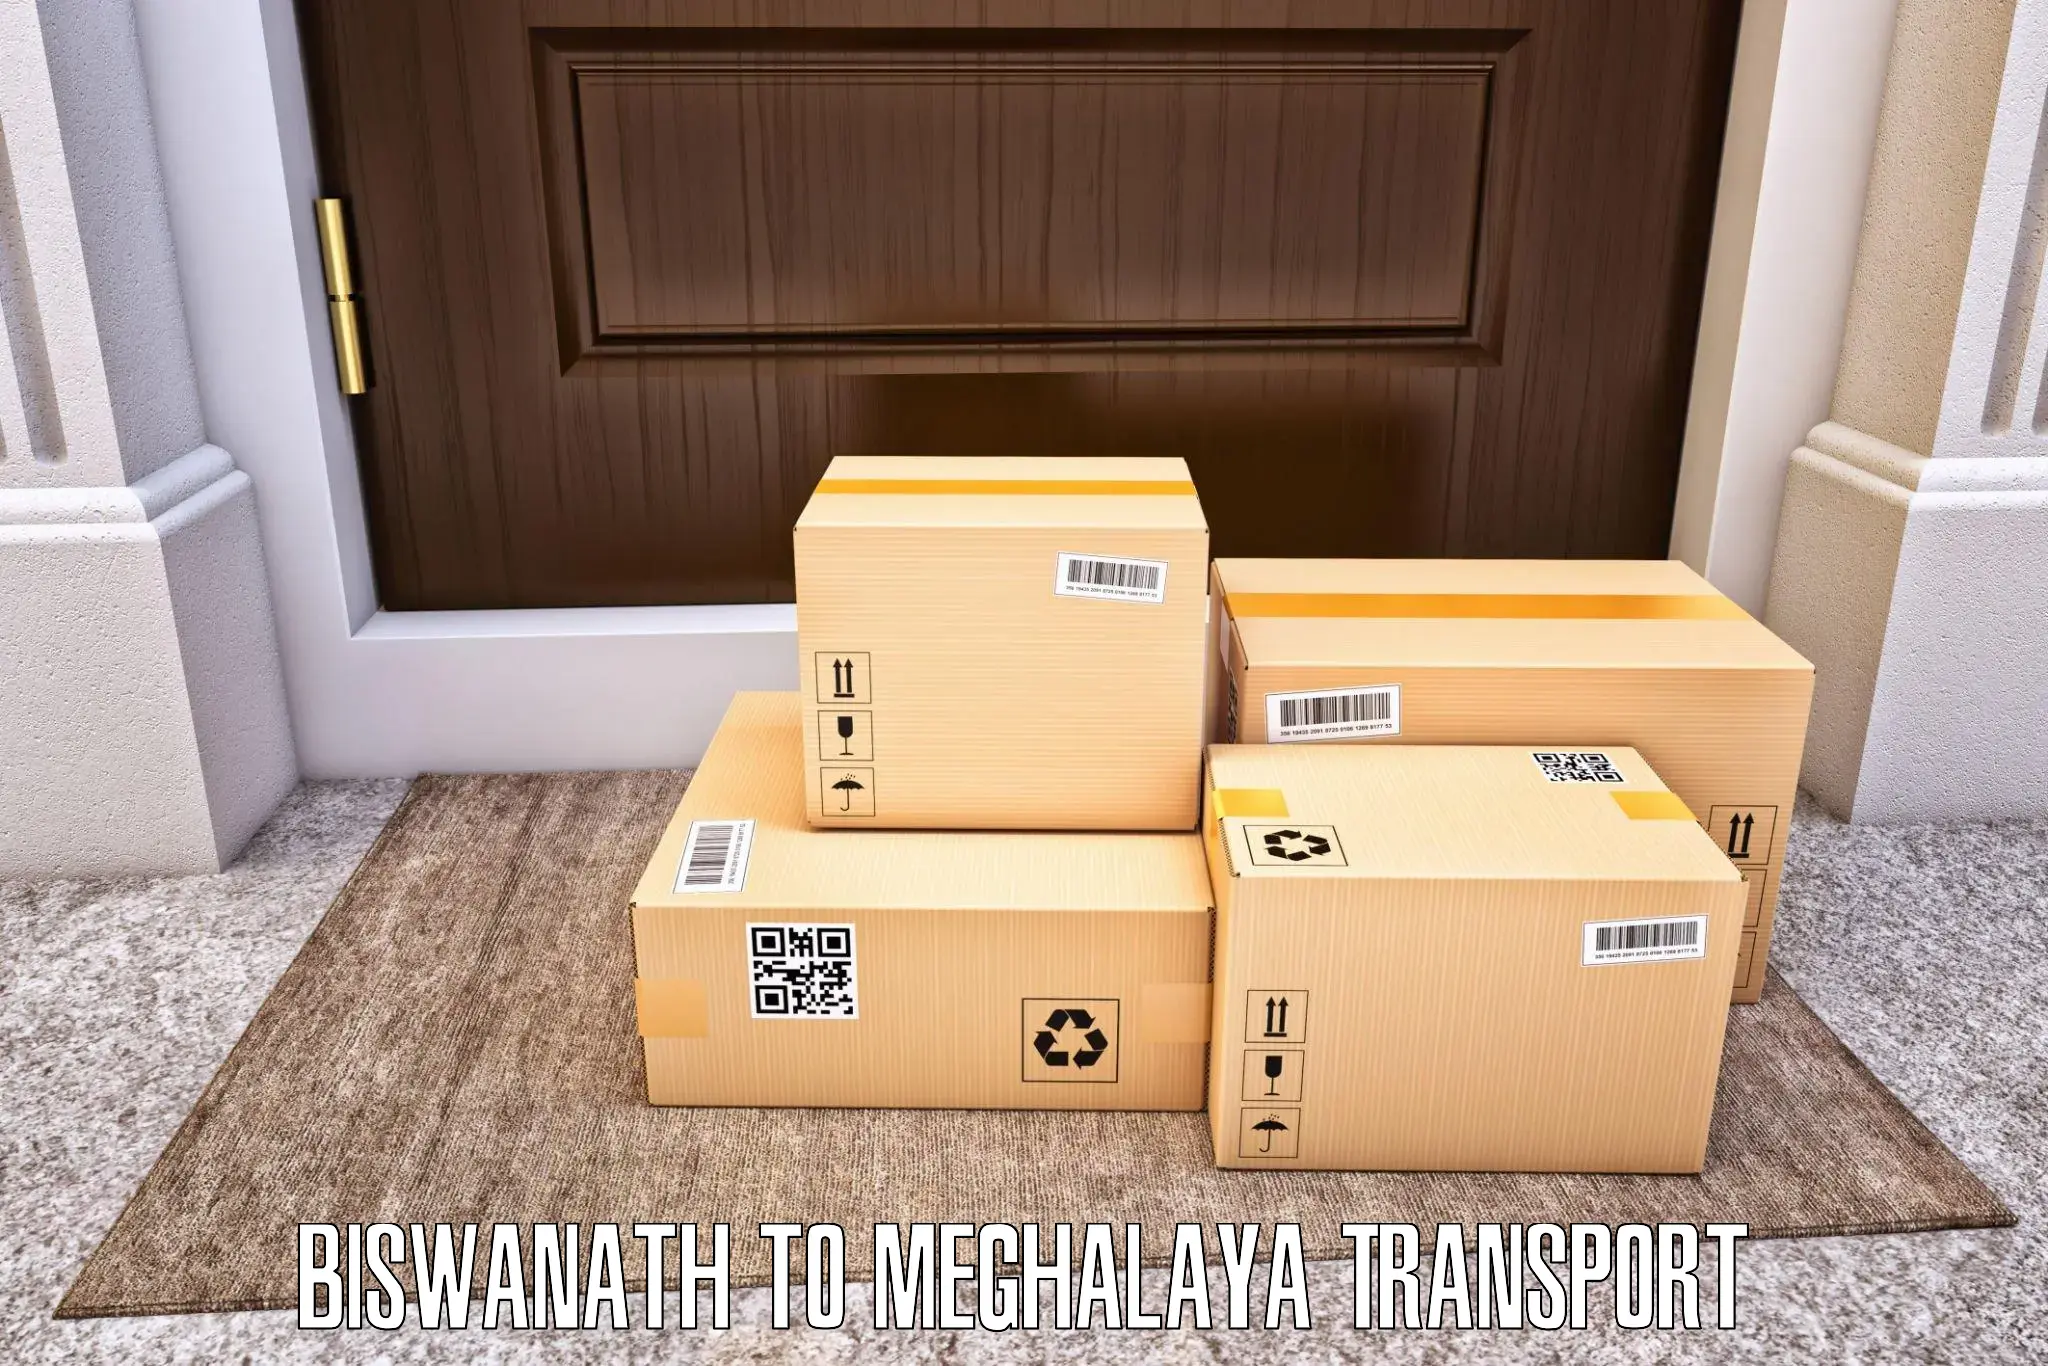 Furniture transport service Biswanath to Shillong